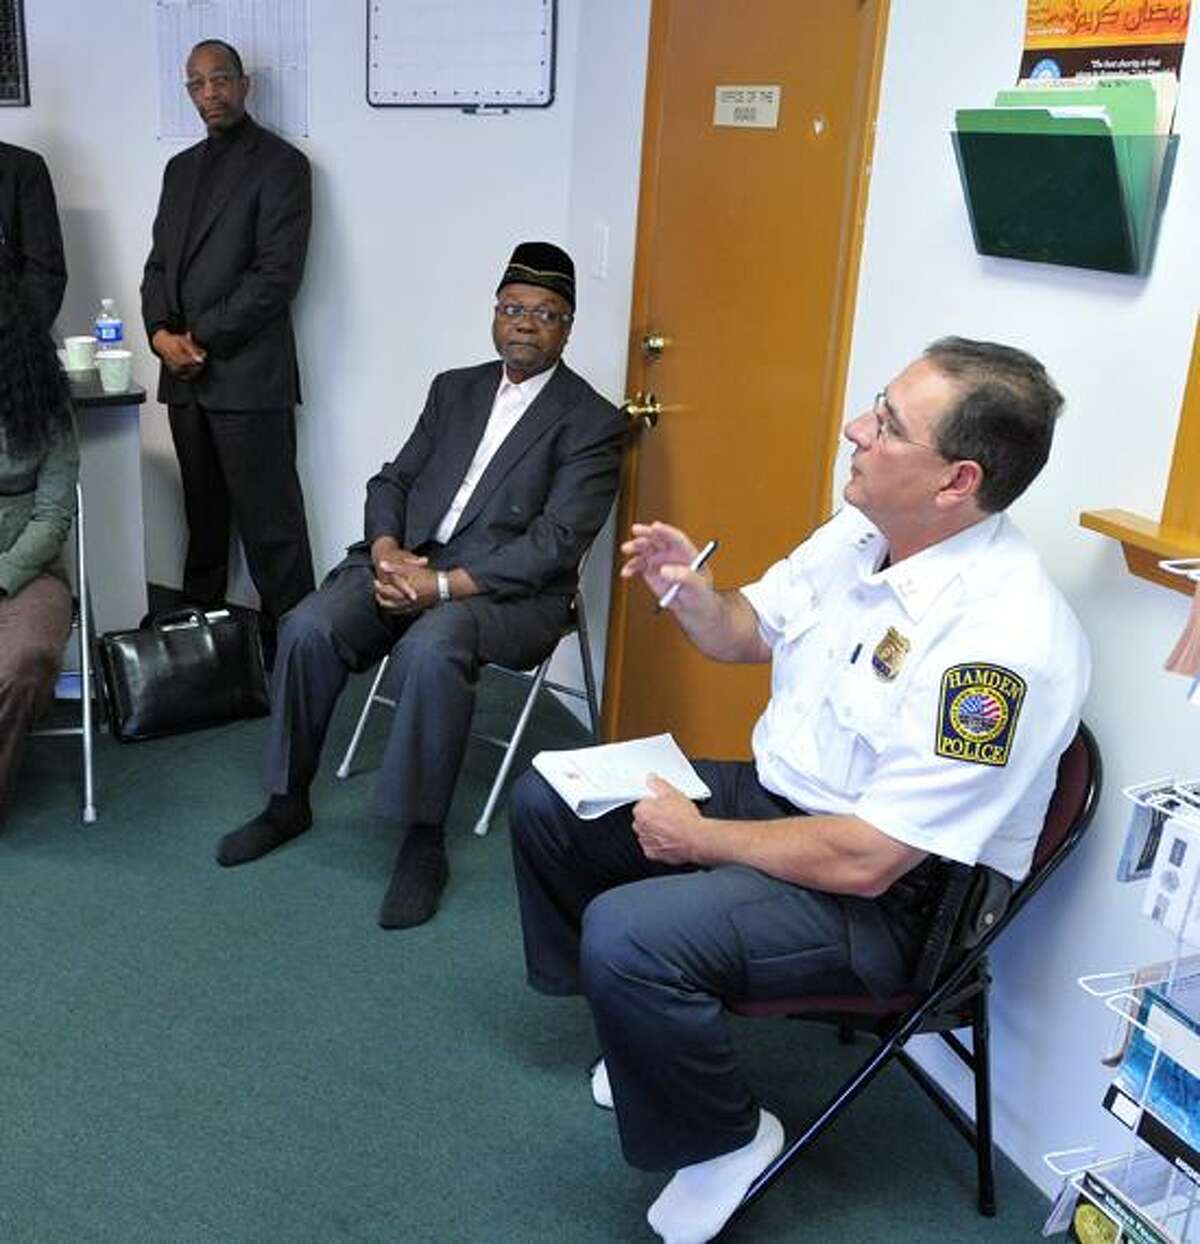 Hamden police Cpt. Ronald Smith talks to residents about violence in the Newhall area of Hamden at the Abdul-Majid Karim Hasan Islamic Center. Peter Casolino/New Haven Register